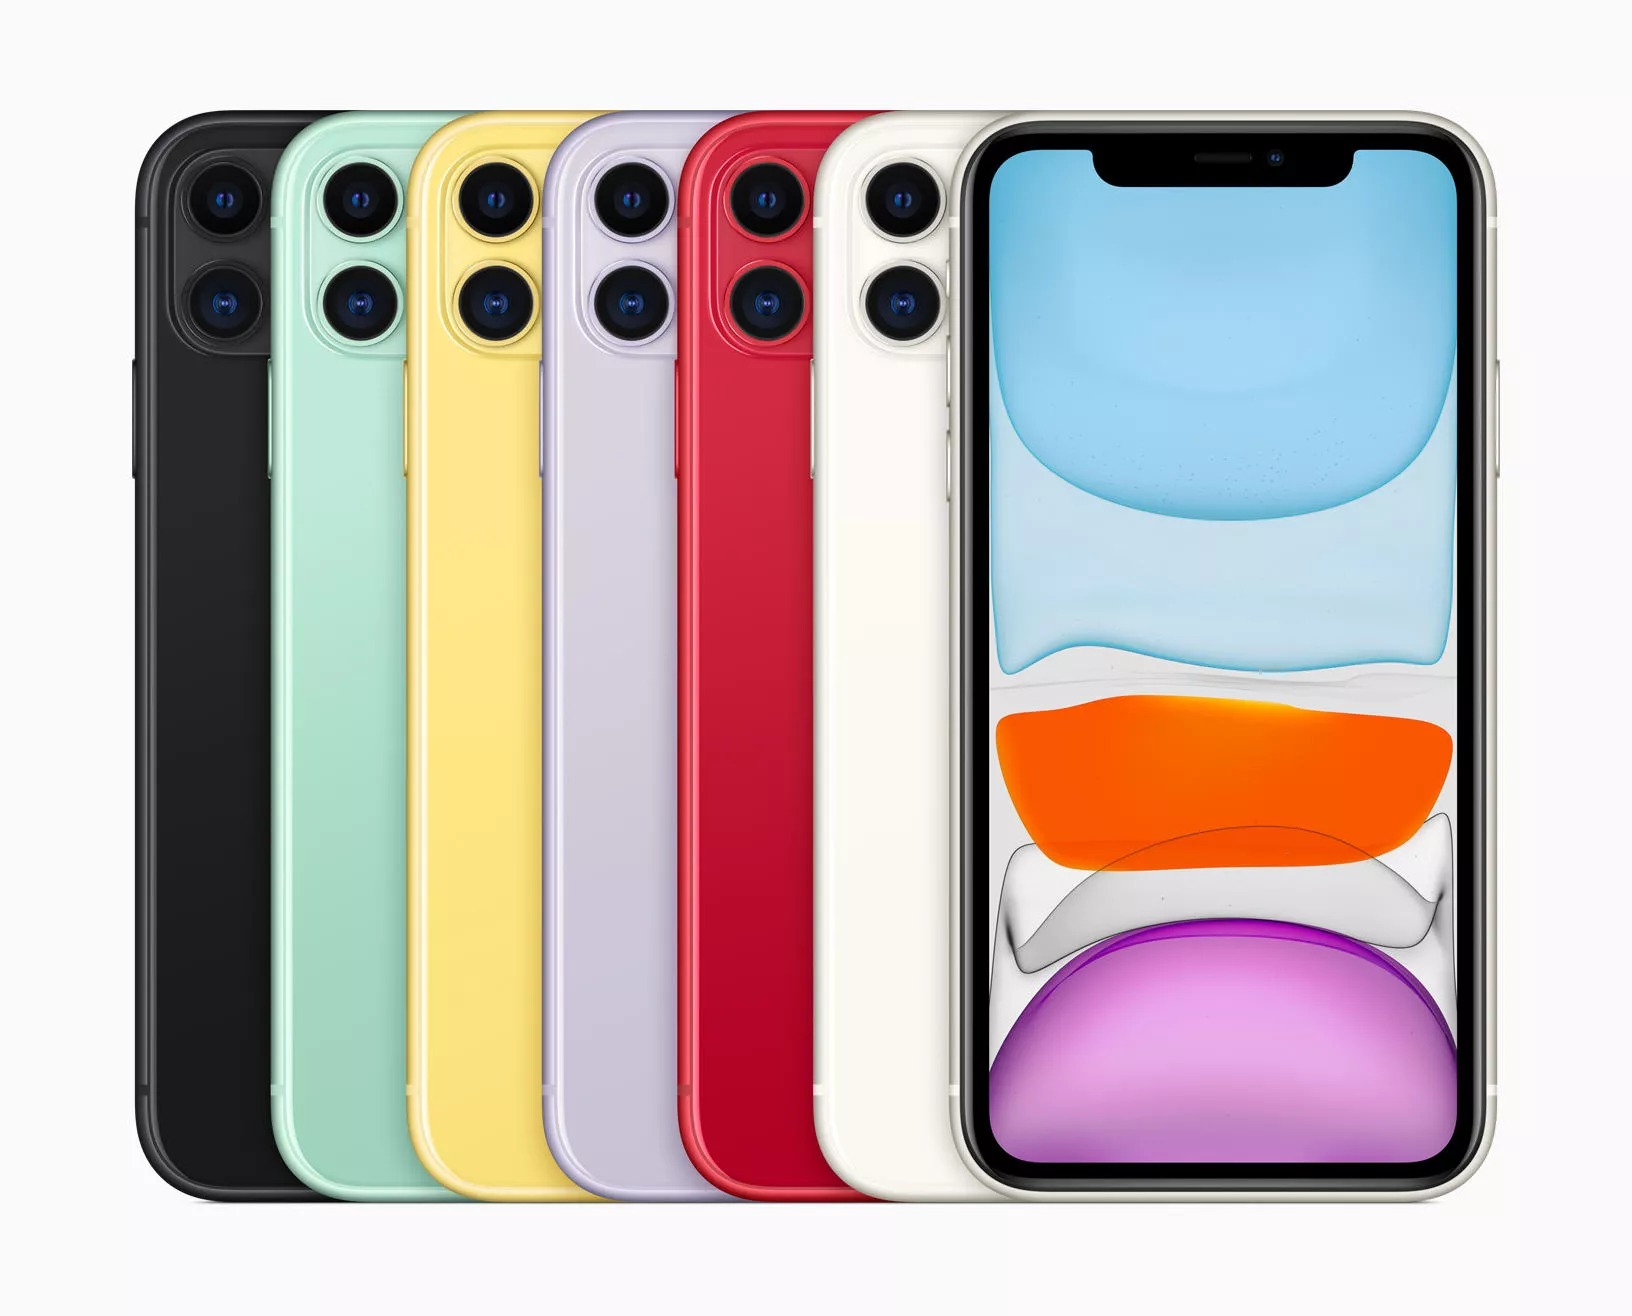 apple iphone 11 family lineup 09